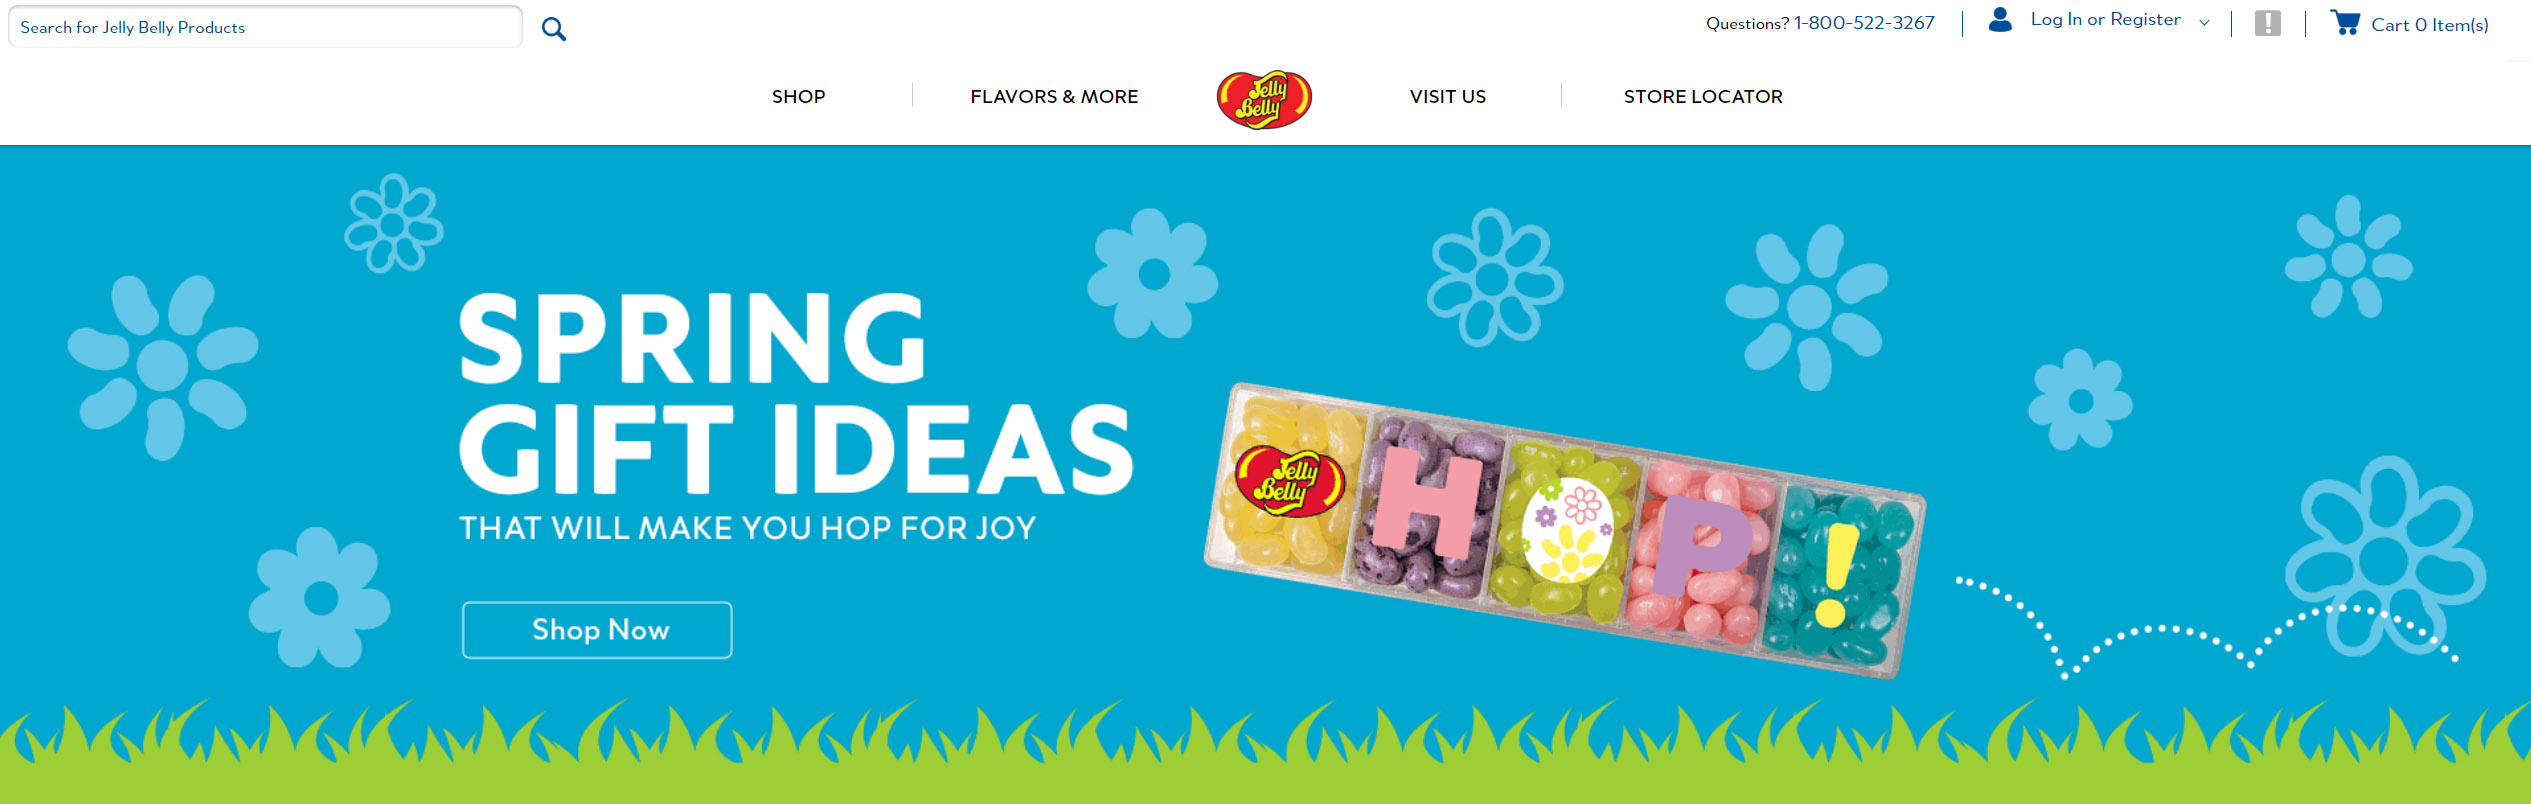 New offer launched: JellyBelly Affiliate Program